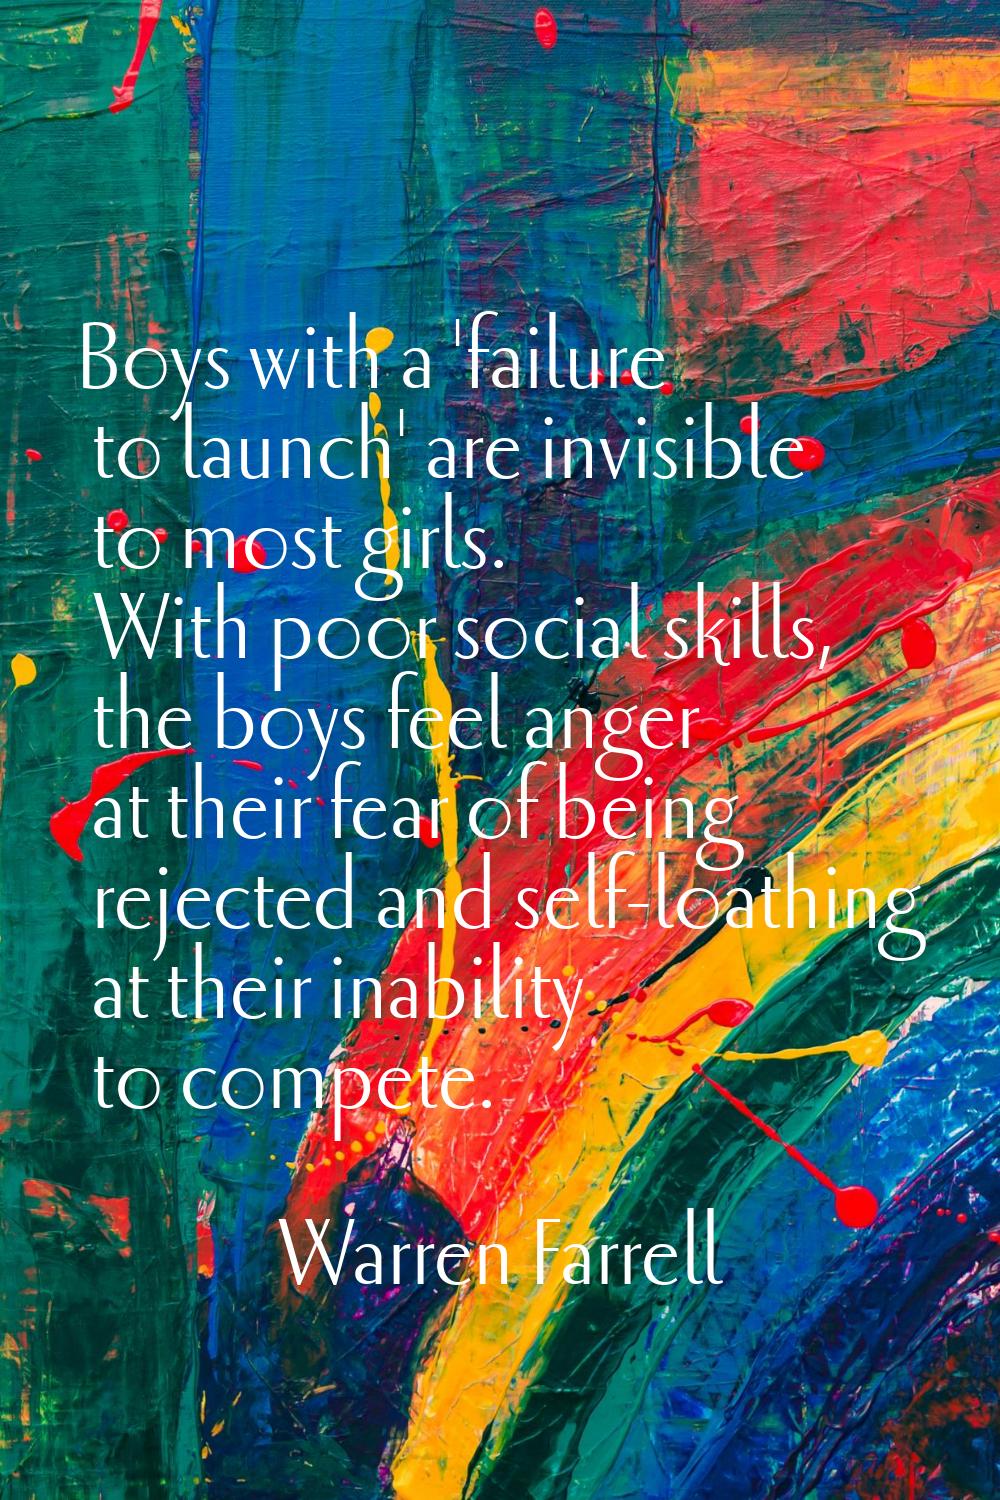 Boys with a 'failure to launch' are invisible to most girls. With poor social skills, the boys feel